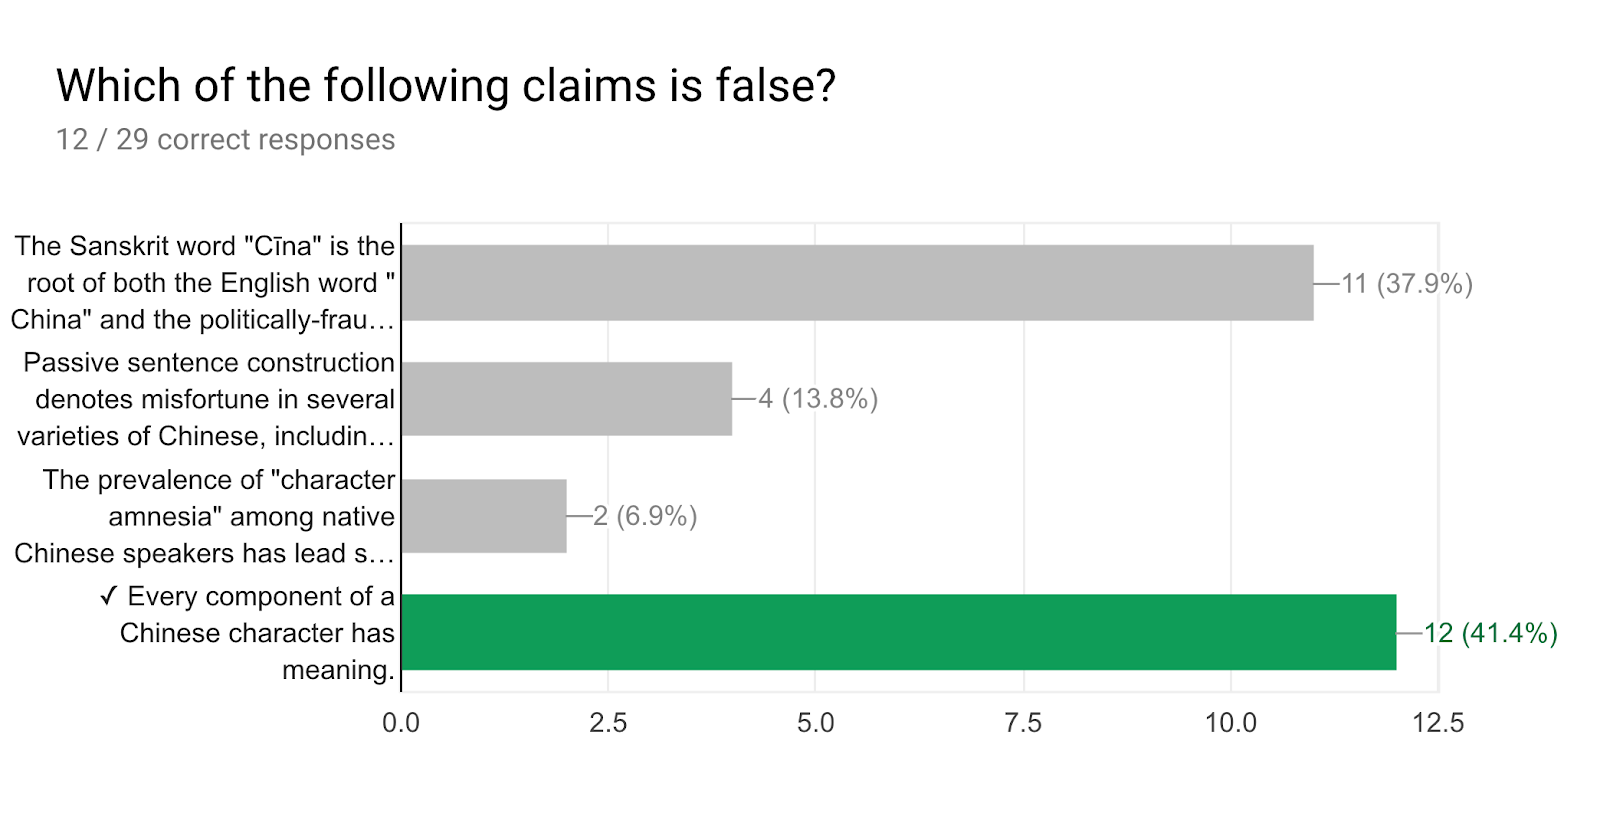 Forms response chart. Question title: Which of the following claims is false?. Number of responses: 12 / 29 correct responses.